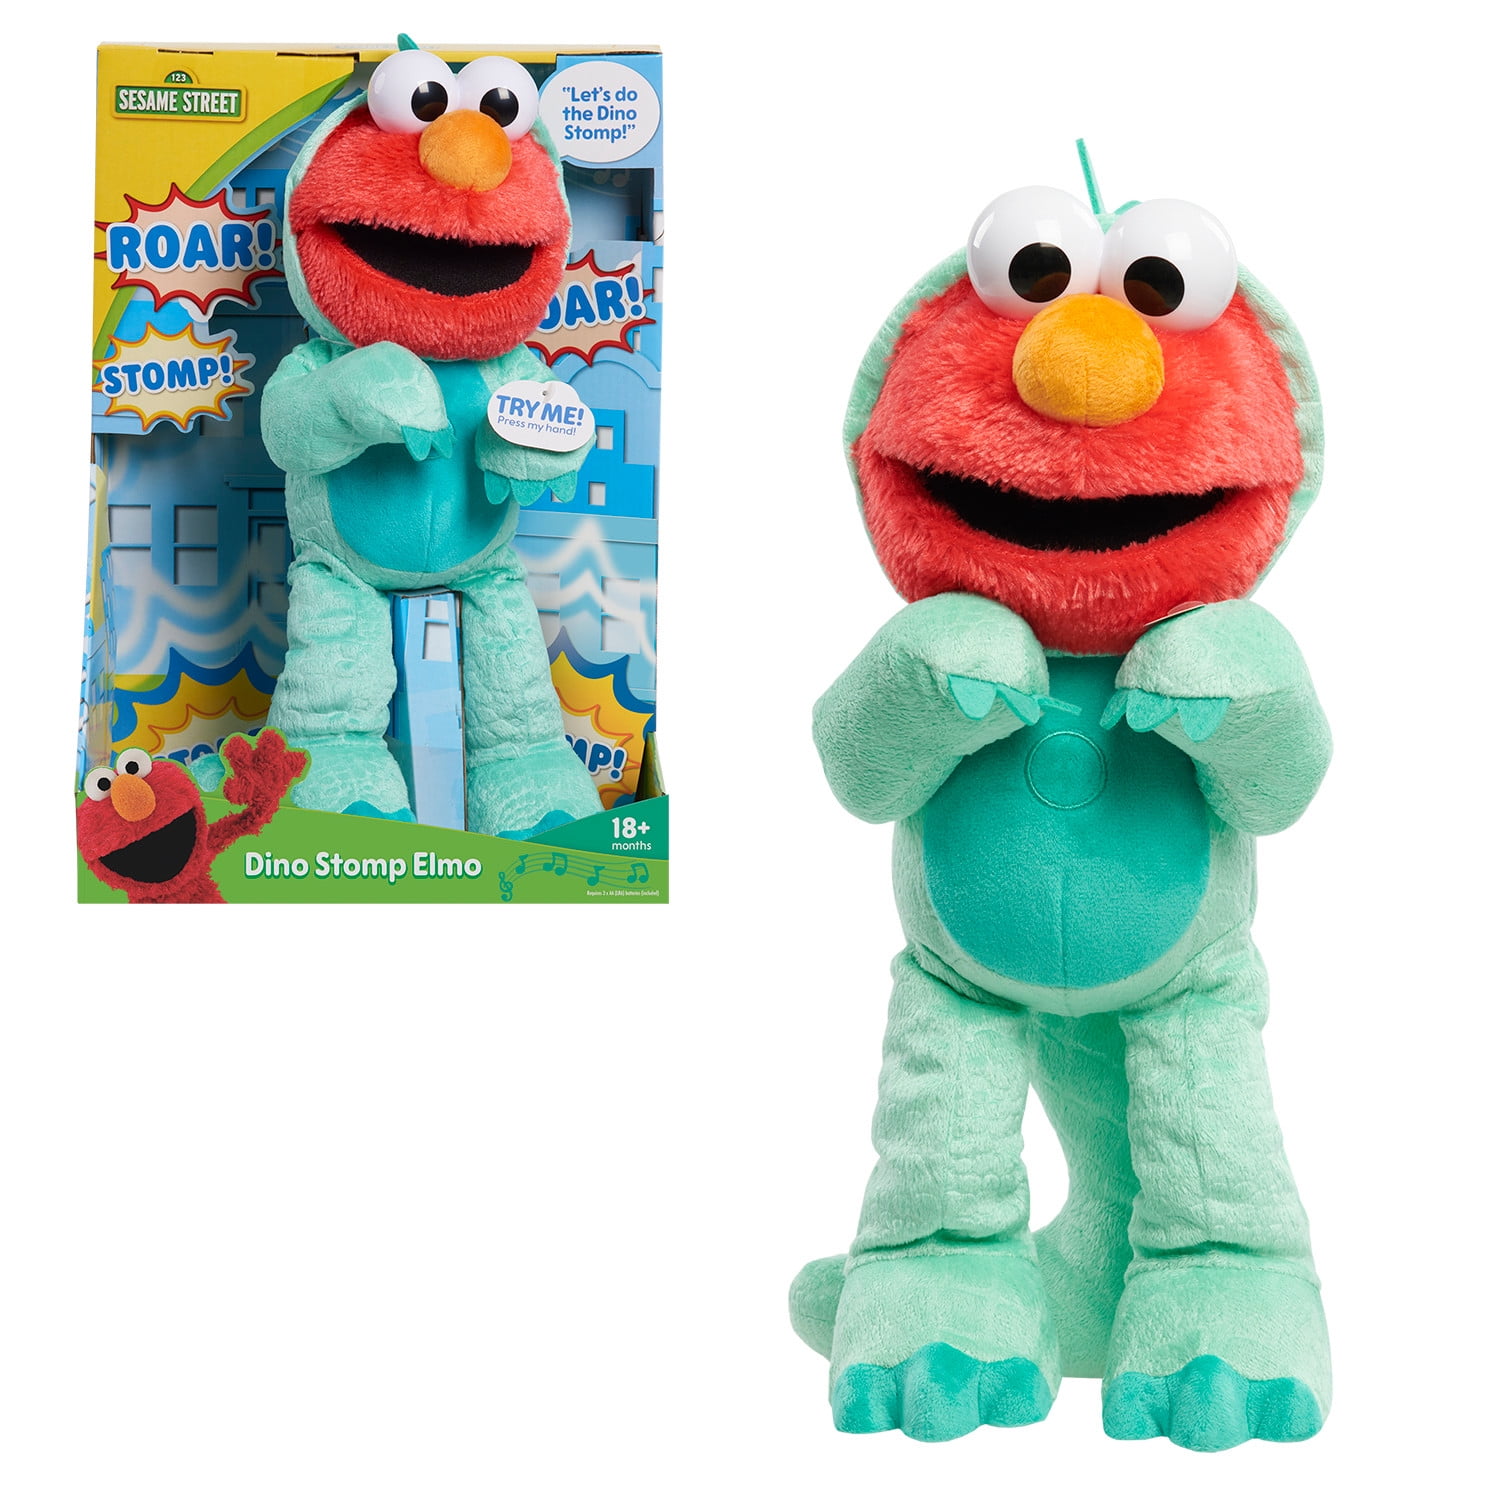 Sesame Street Dino Stomp Elmo 13-Inch Plush Stuffed Animal Sings and Dances, Officially Licensed Kids Toys for Ages 18 Month, Gifts and Presents